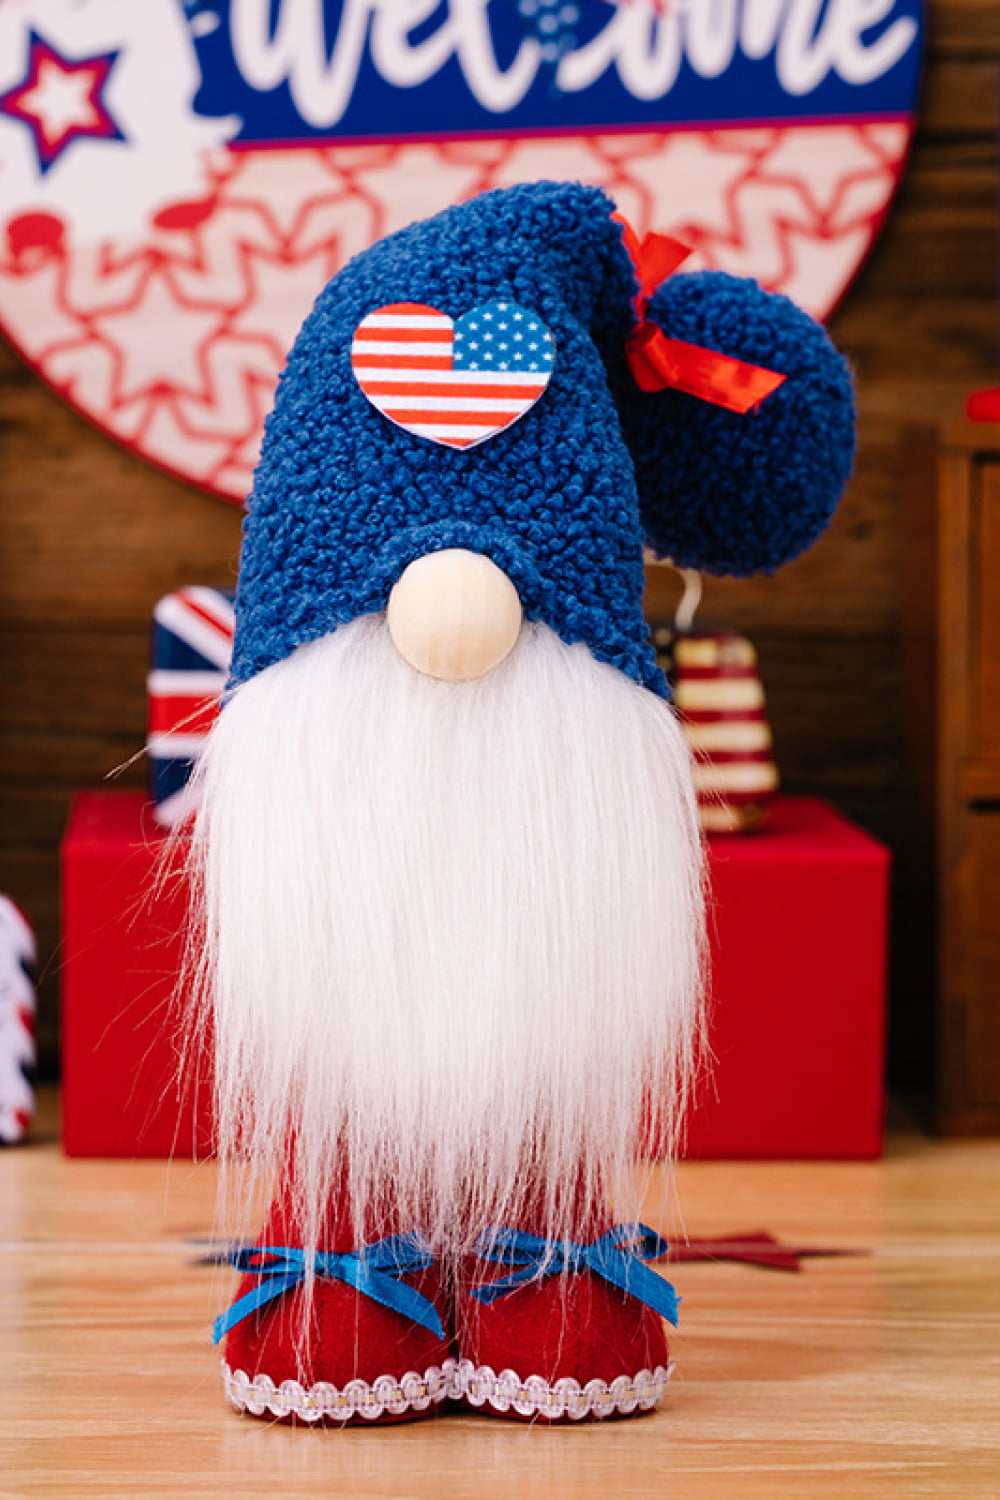 2-Piece Independence Day Knit Gnomes